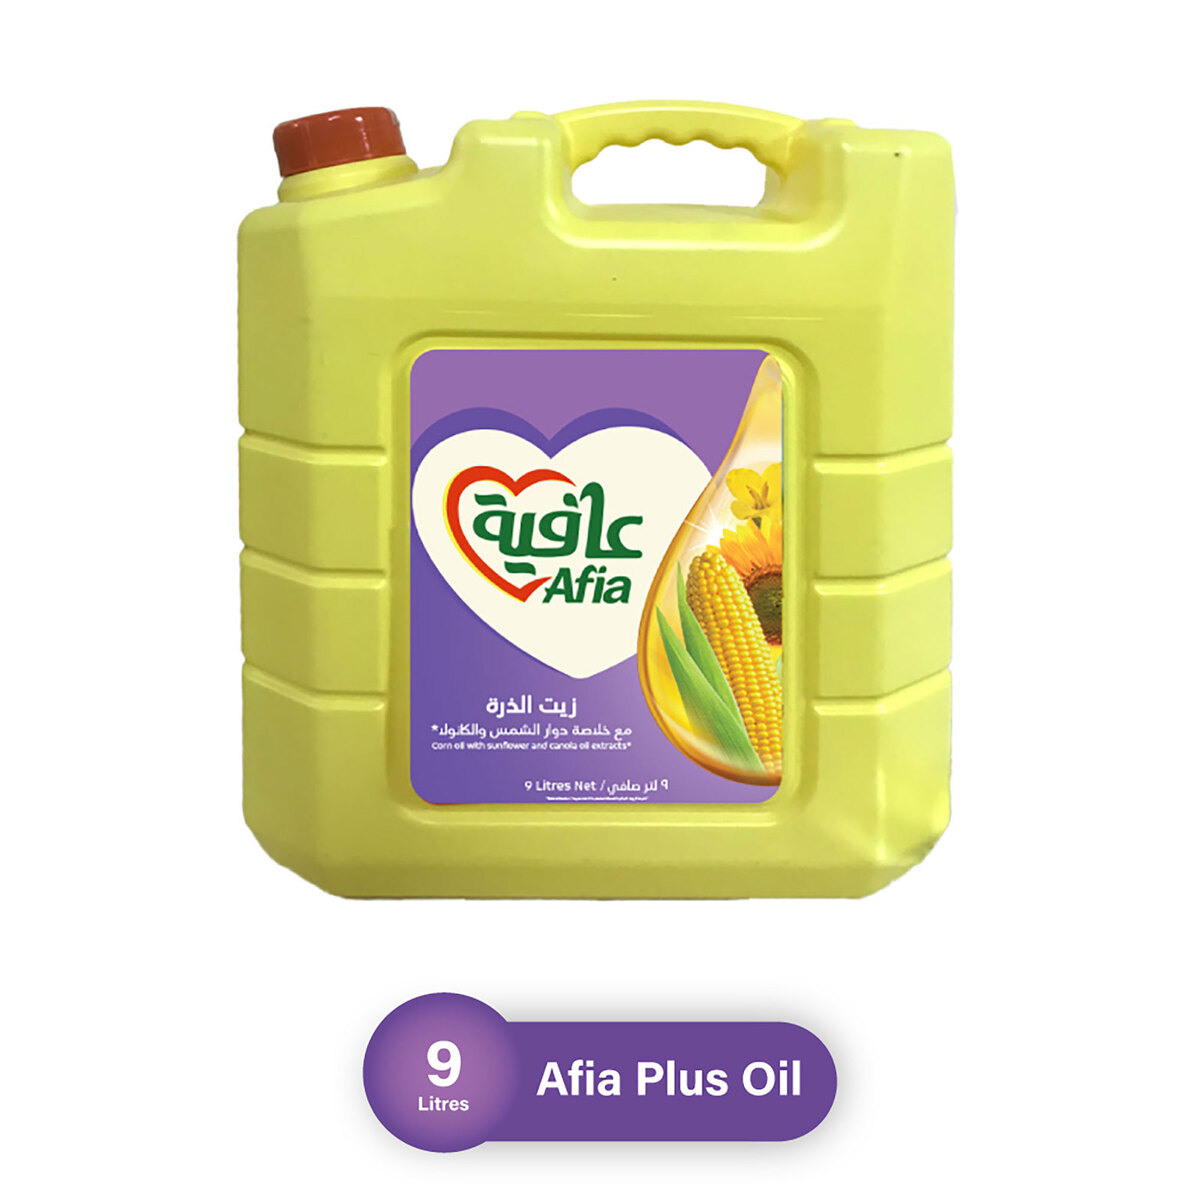 Afia Corn Oil with Sunflower and Canola Oil Extracts 9 Litres